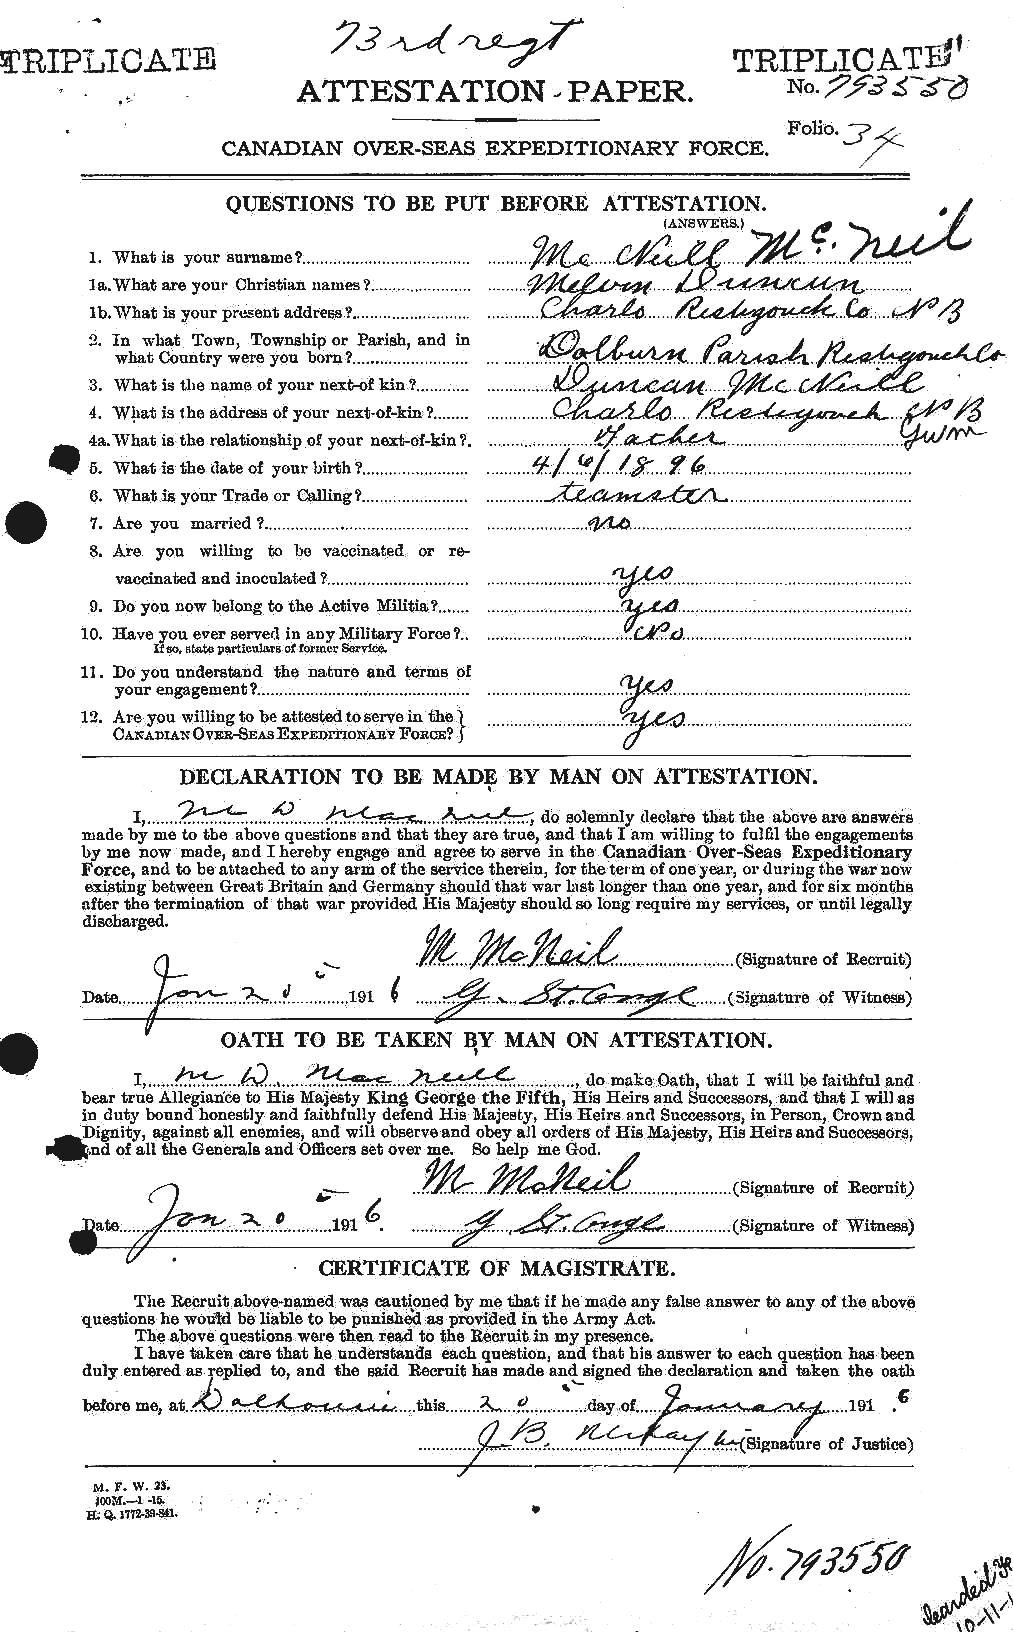 Personnel Records of the First World War - CEF 542398a